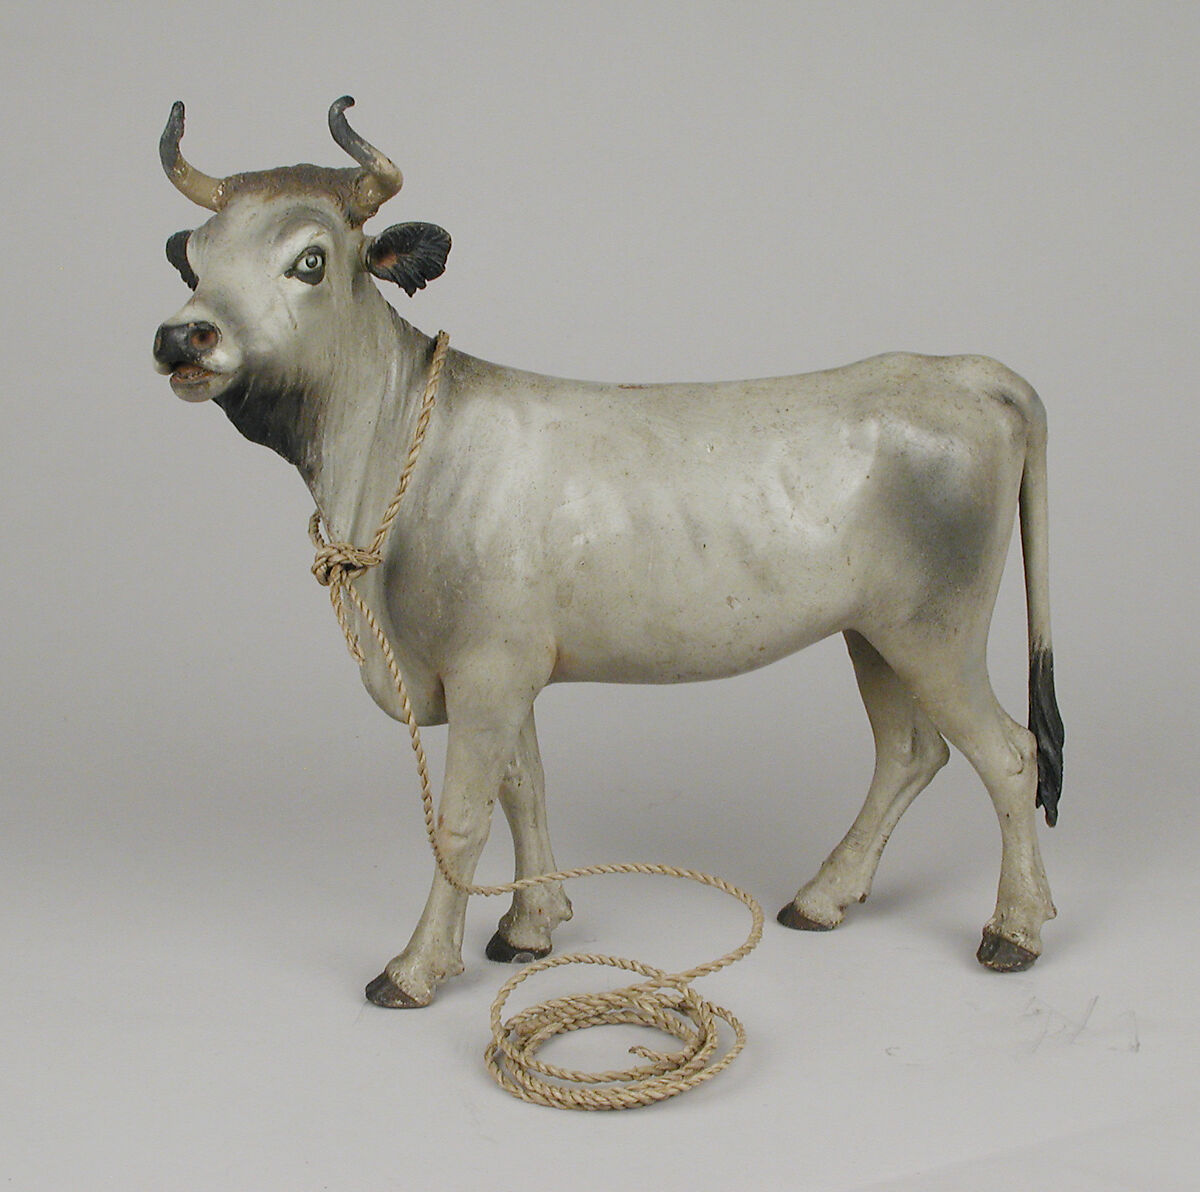 Young bull, Francesco Gallo, Polychromed terracotta body with wooden legs, tail and horns, Italian, Naples